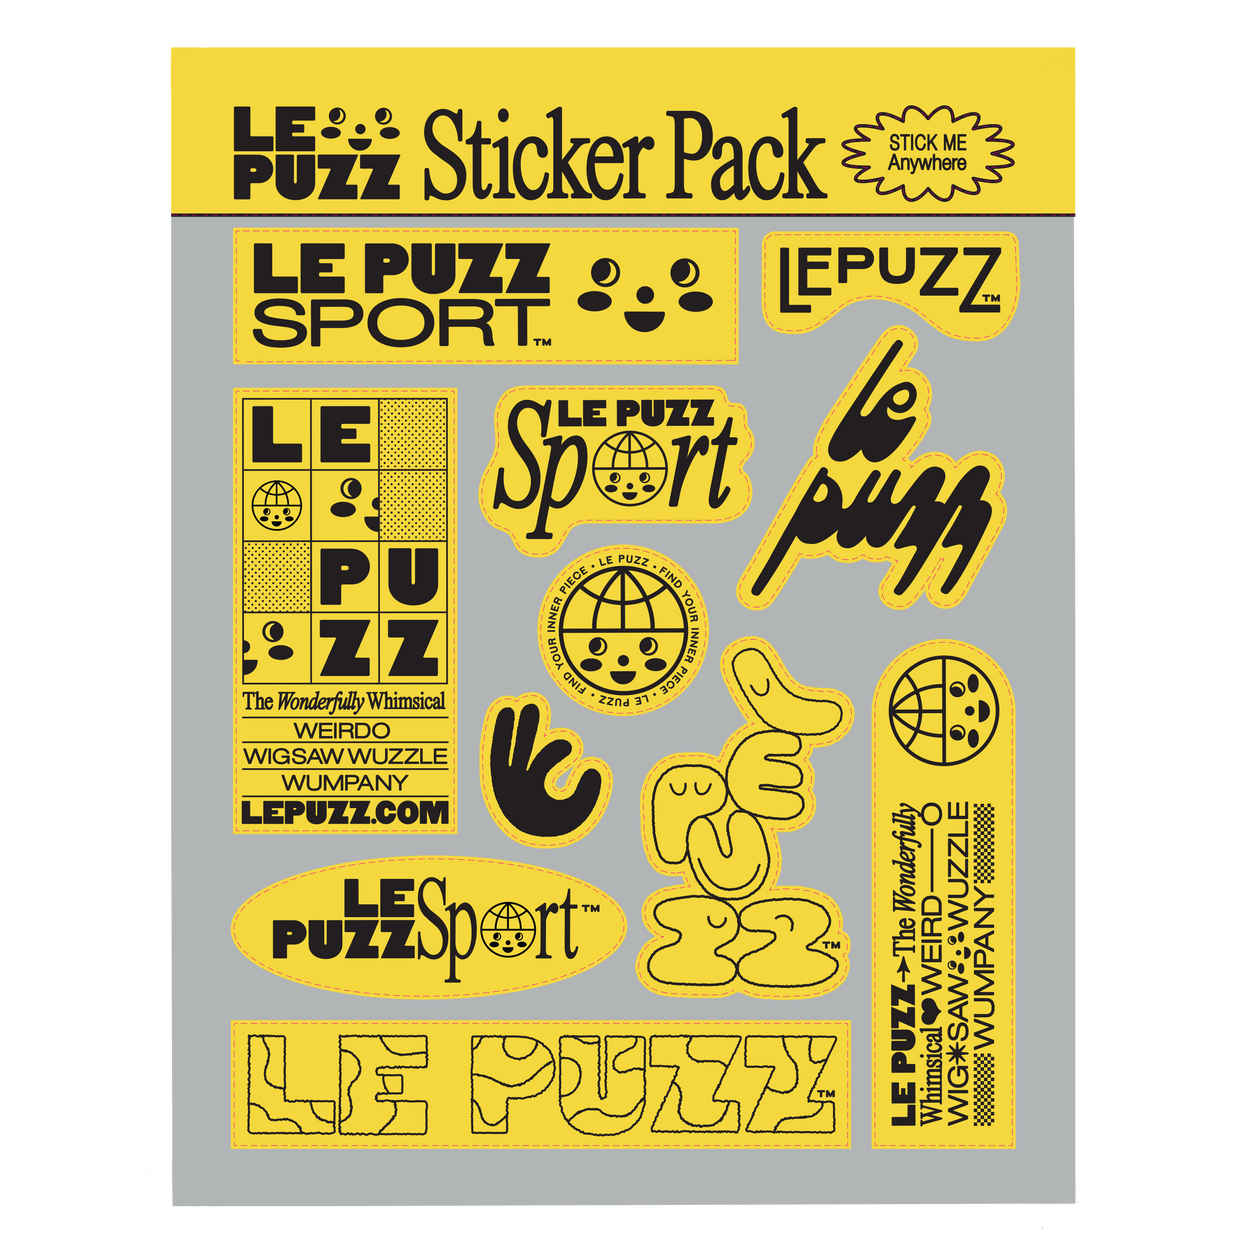 Le Puzz Sticker Pack